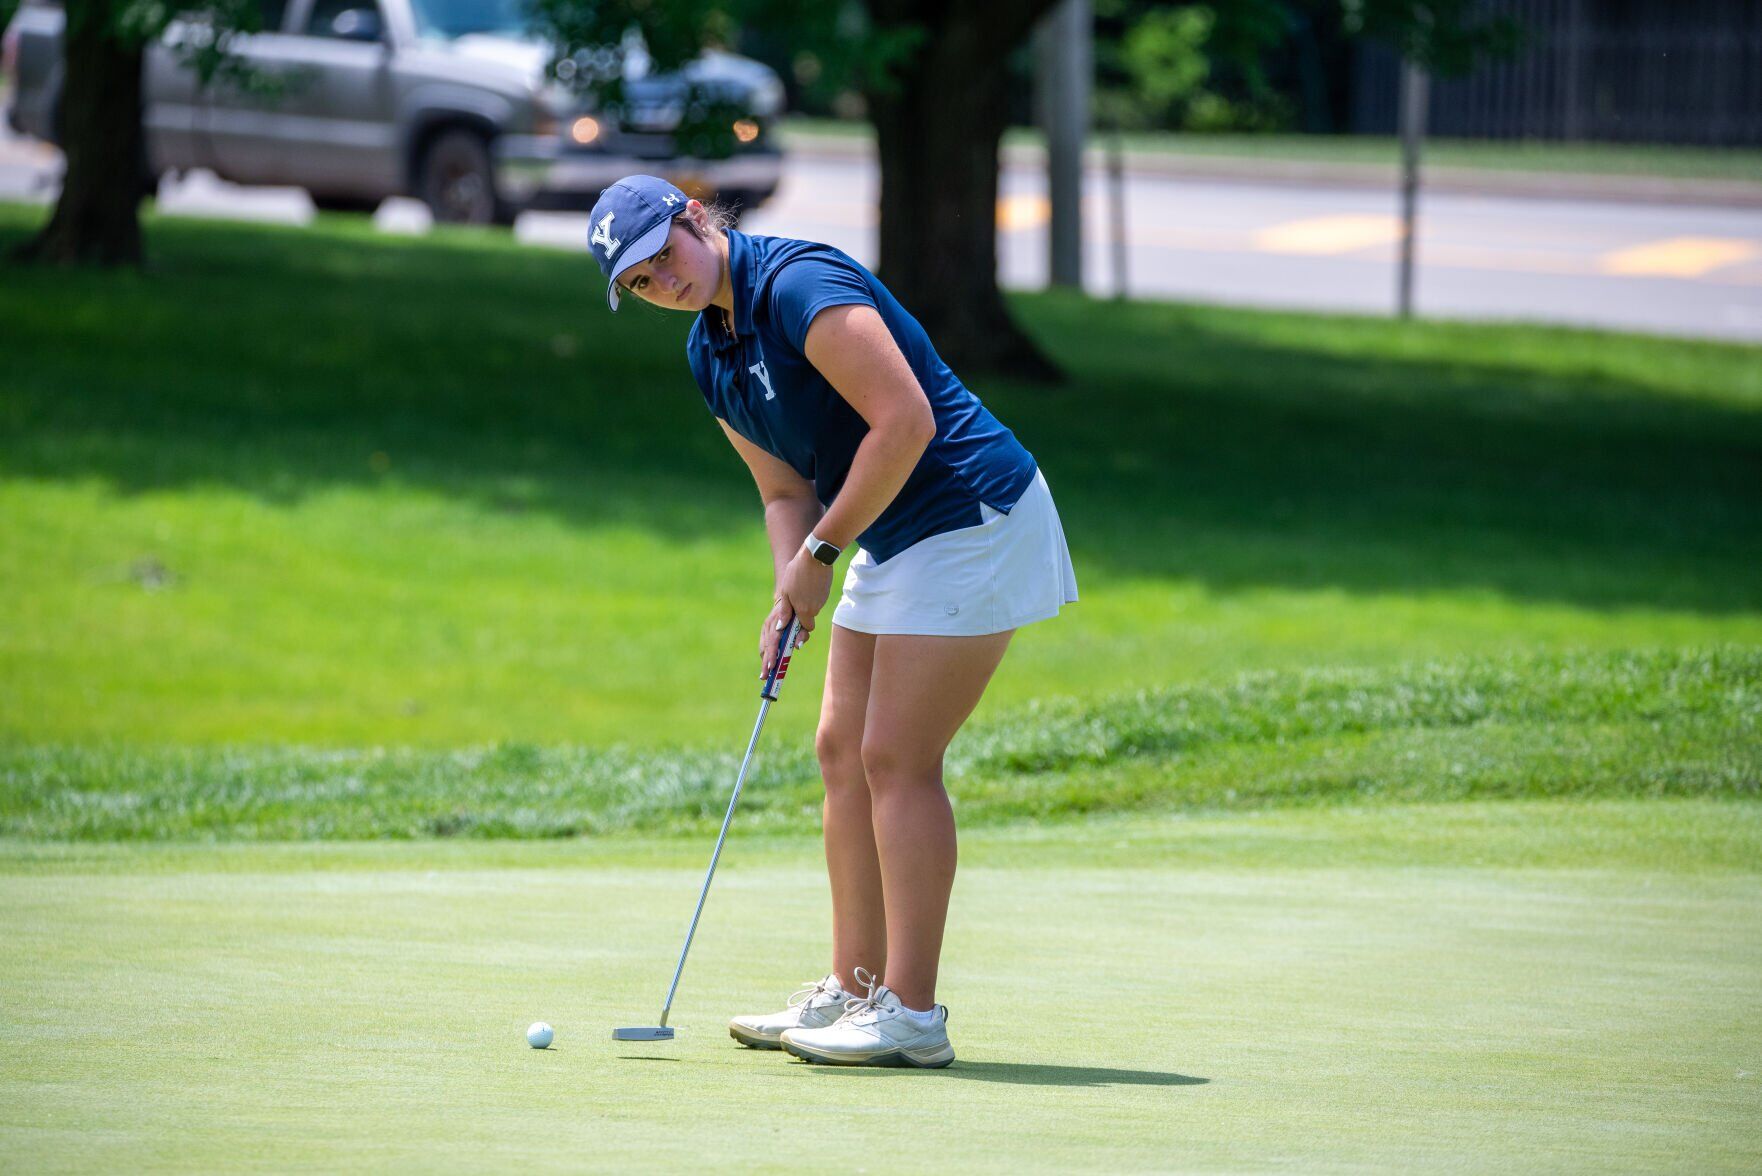 Schedule change leads to greater exposure, bright future for amateur female golfers at Porter Cup Sports lockportjournal pic image